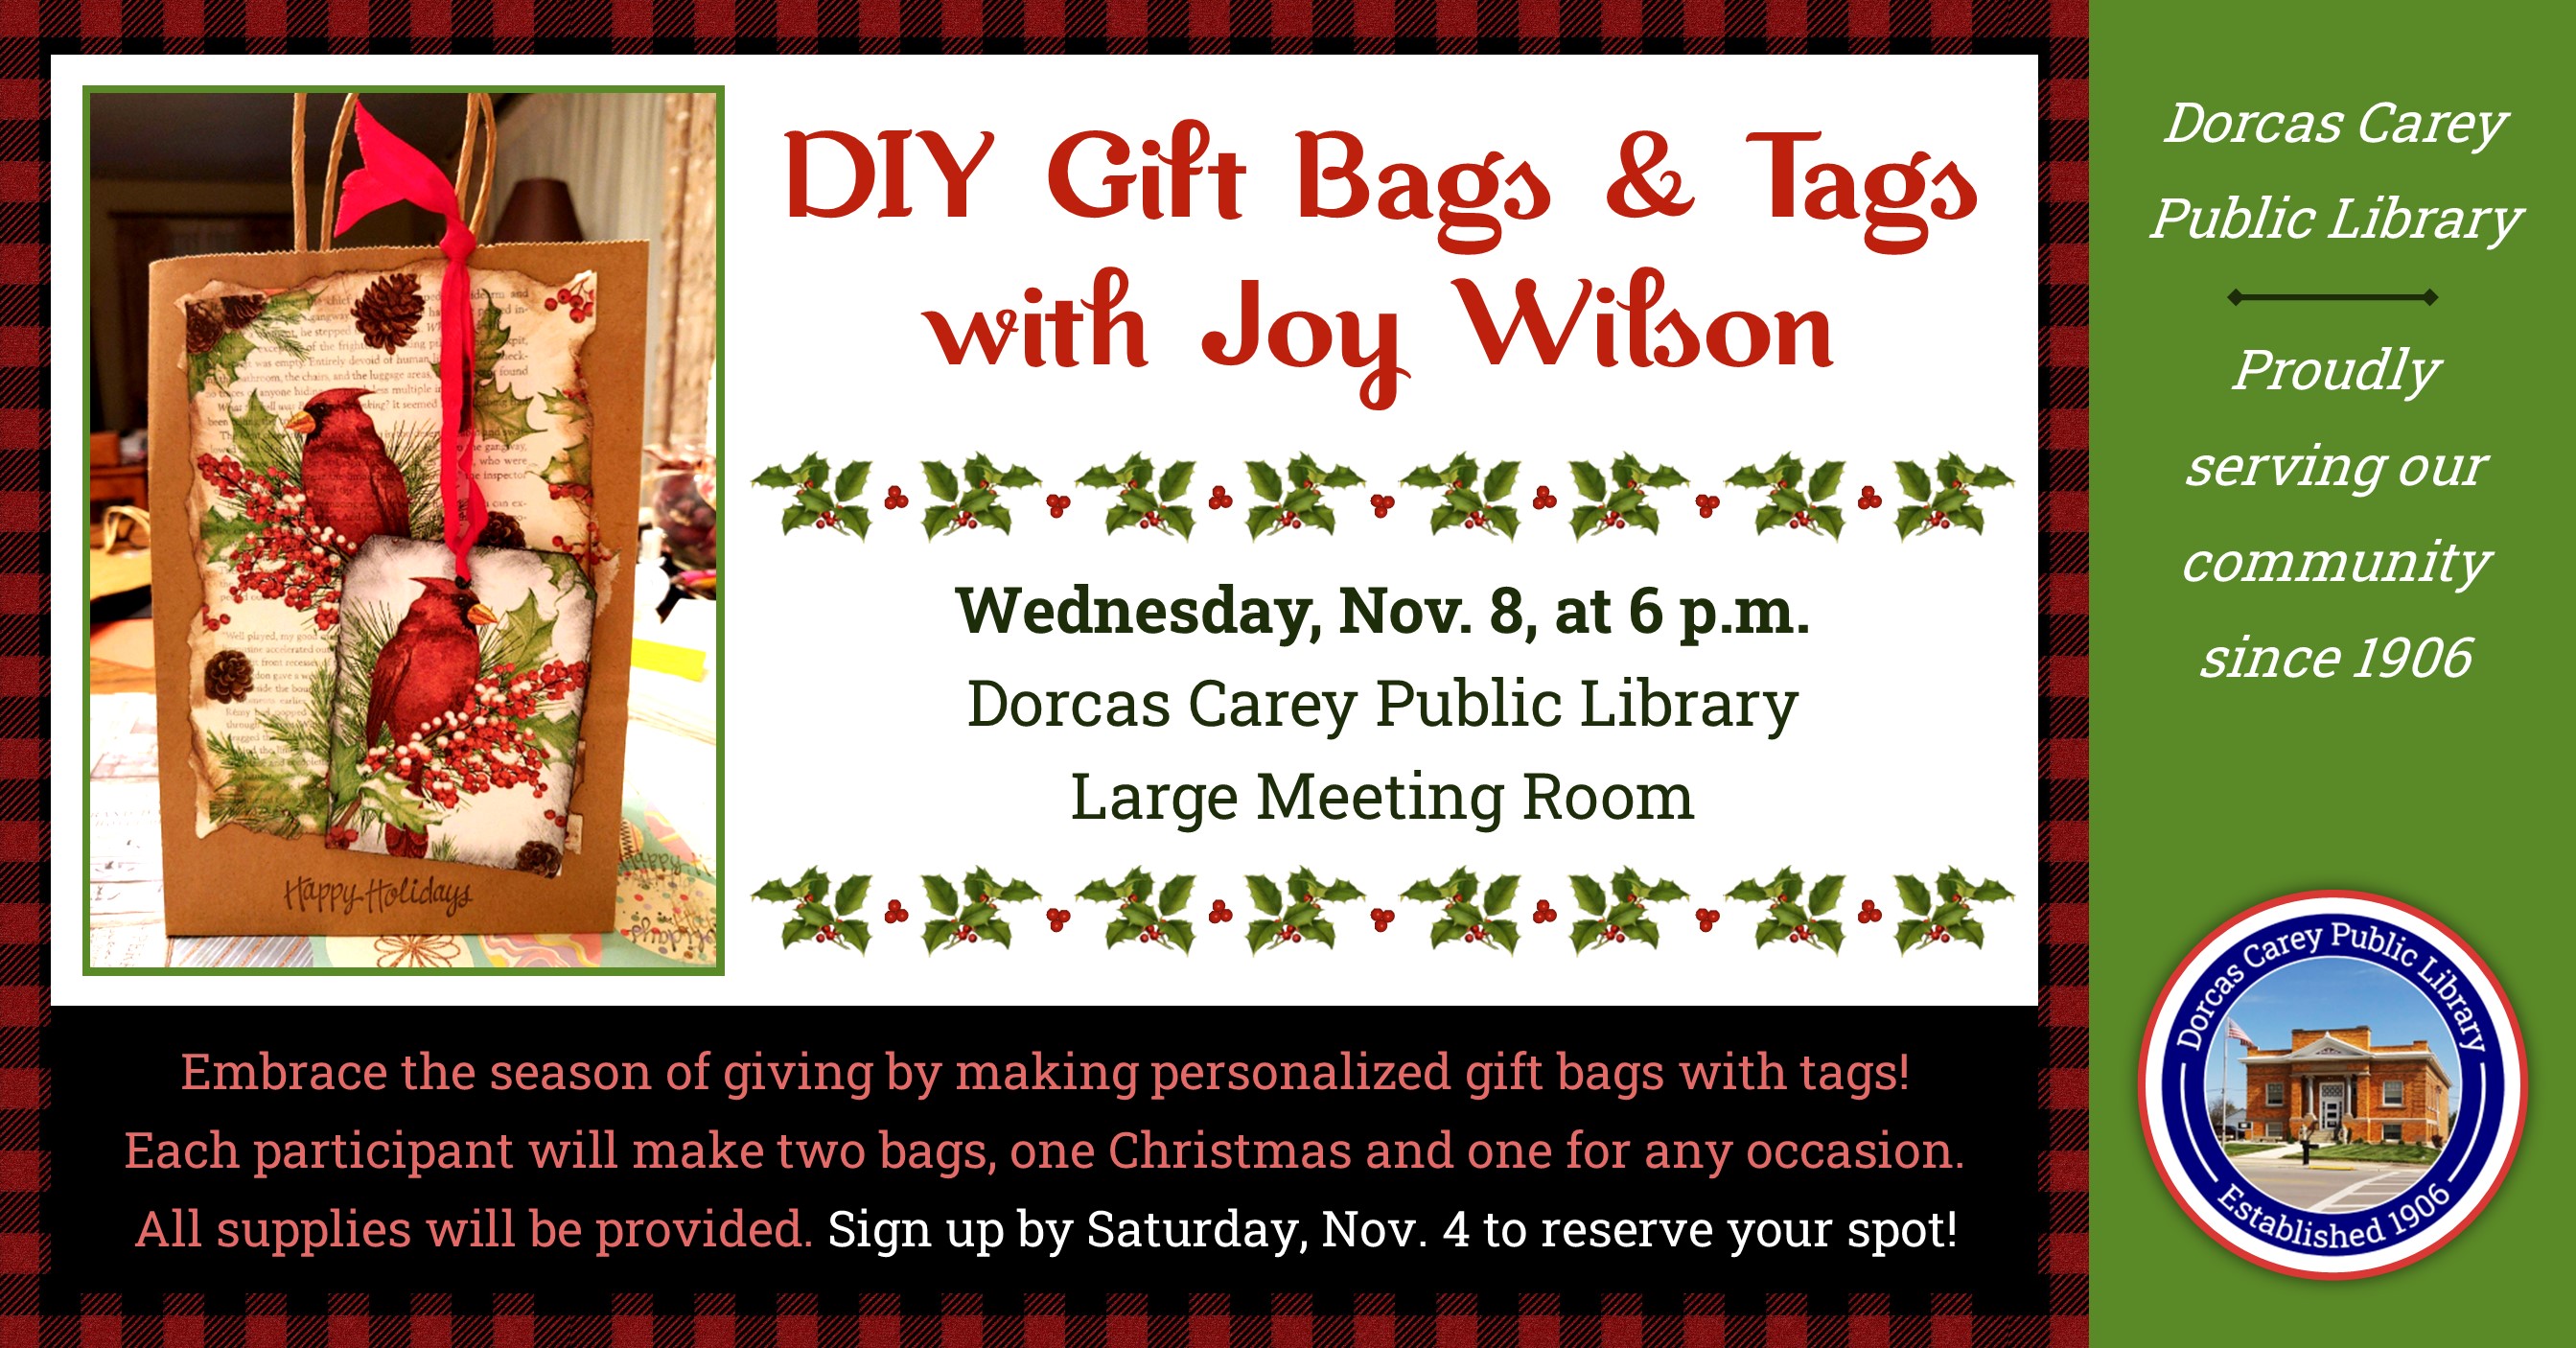 Join Joy Wilson on Wednesday, November 8th at 6 p.m. and enjoy the bag & tag fun!  